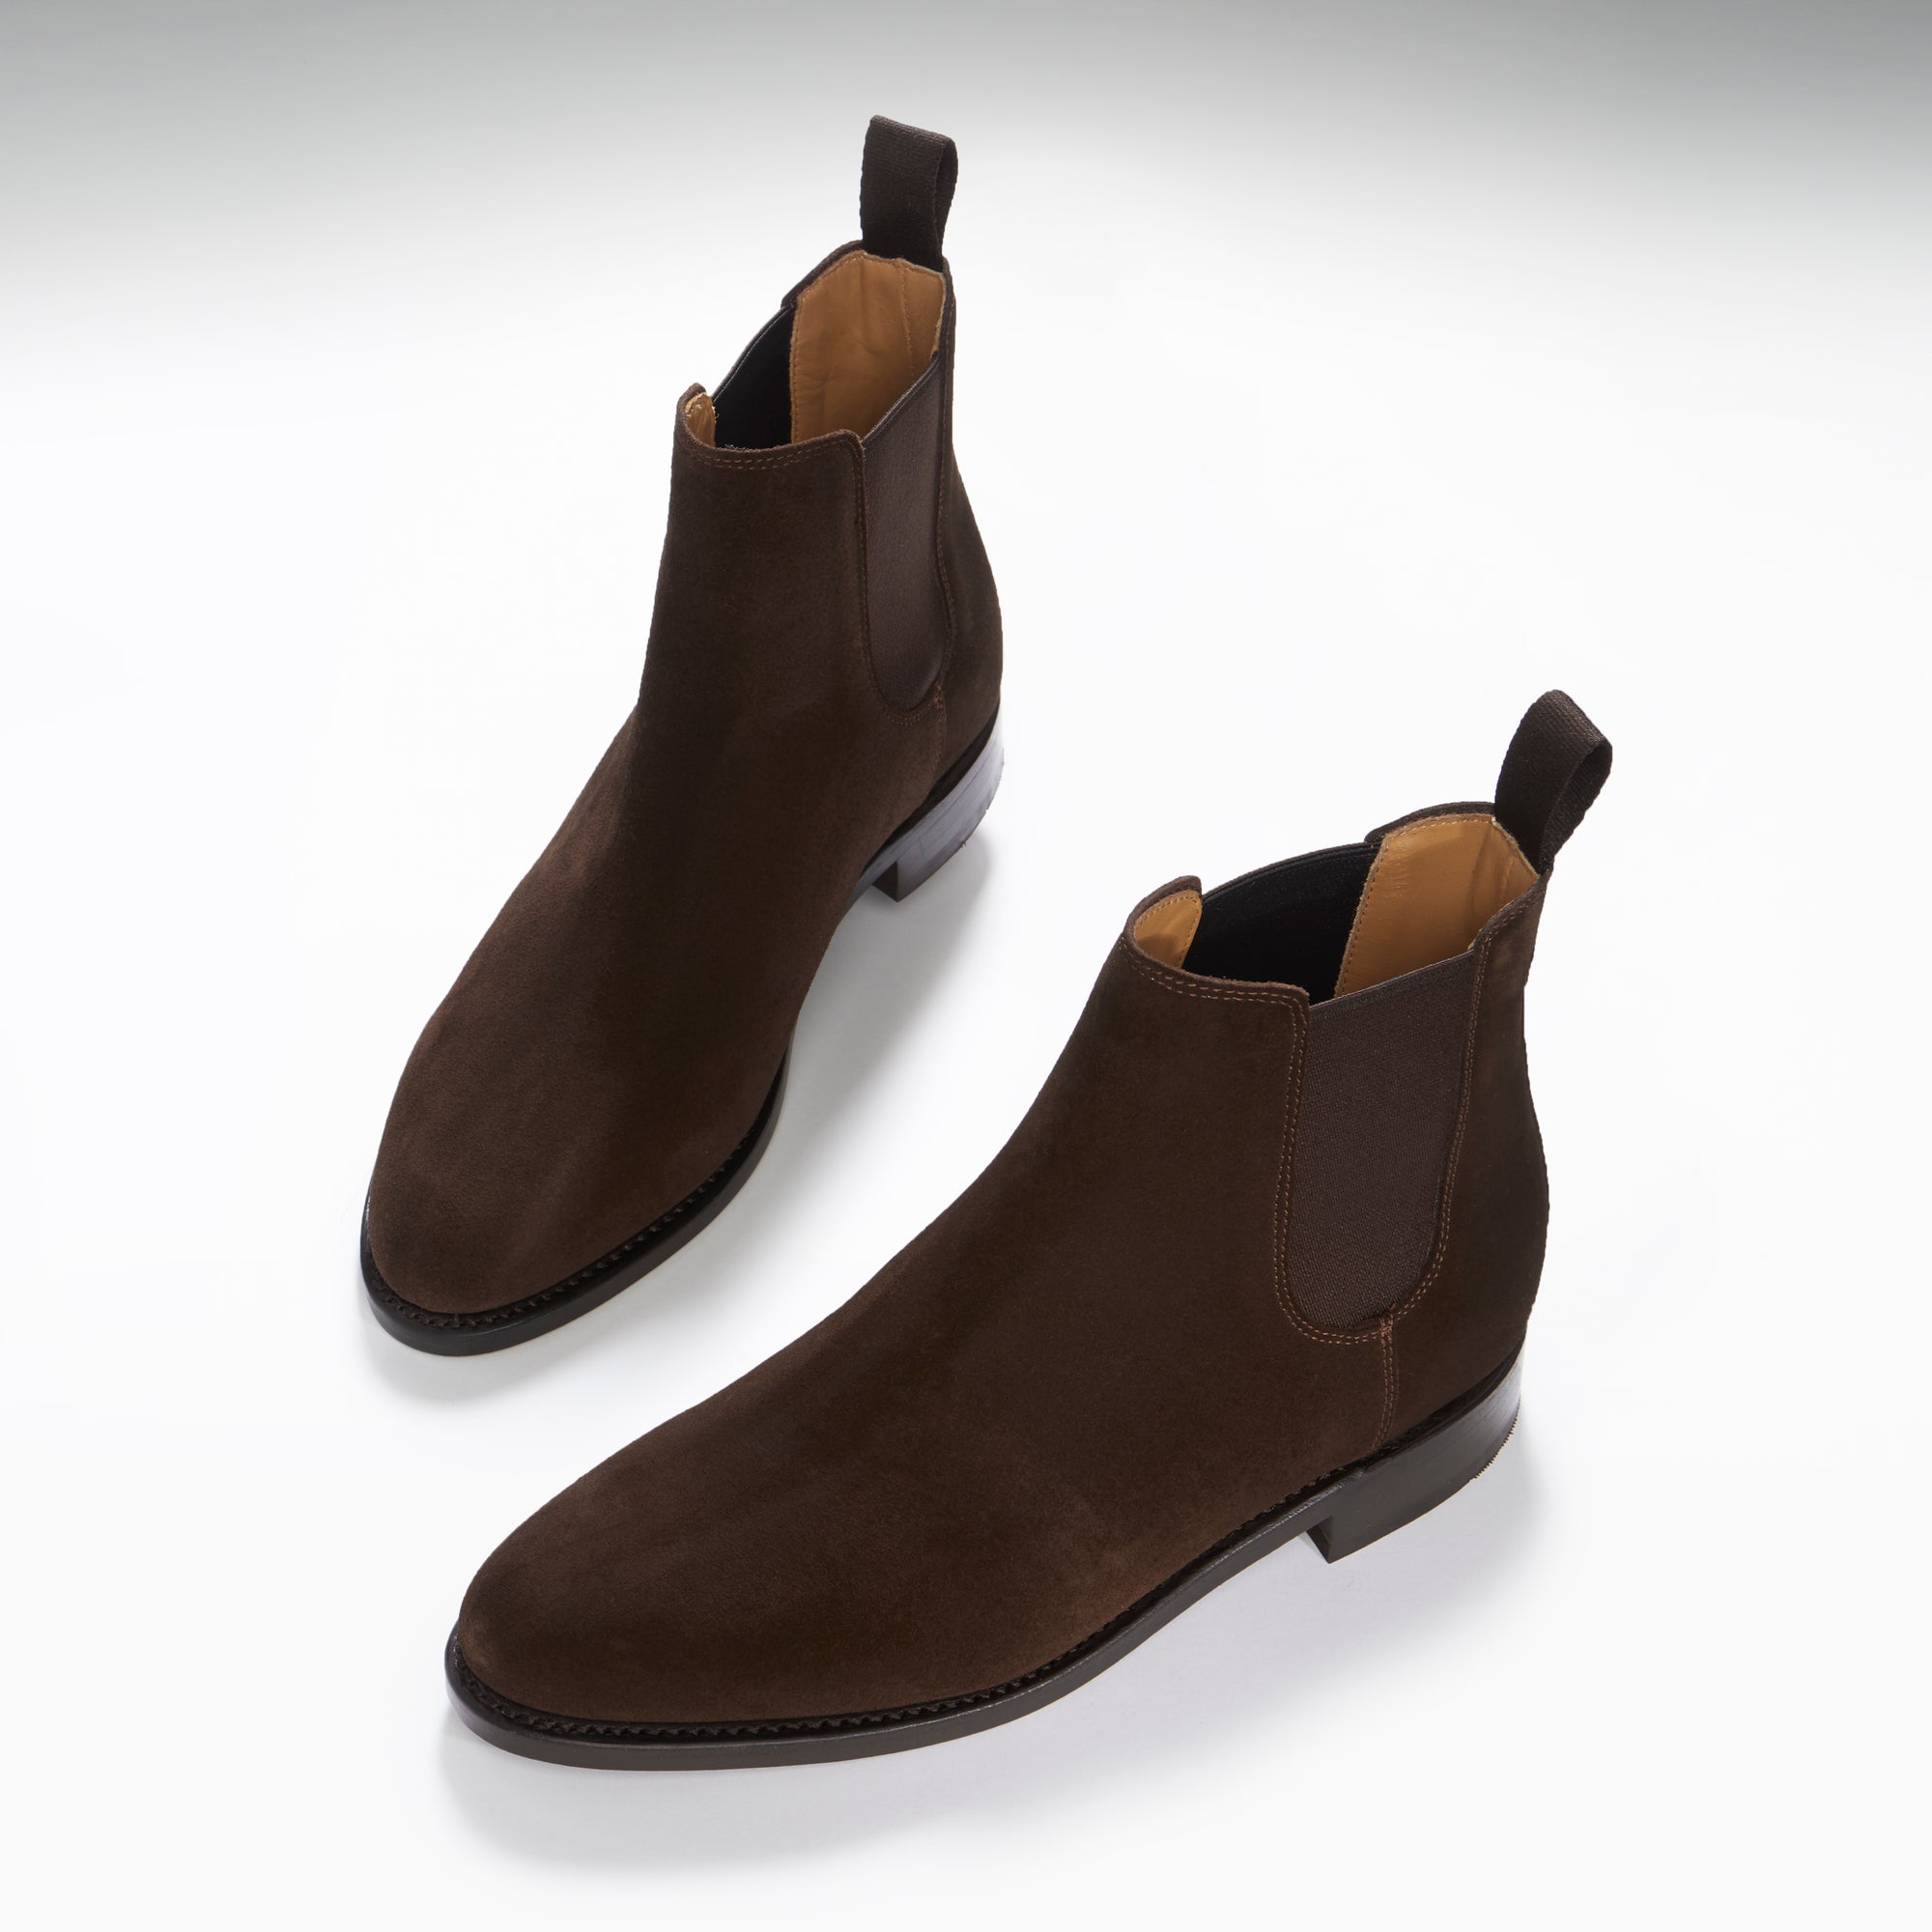 Women's Brown Suede Chelsea Boots, Welted Leather Sole - Hugs & Co.